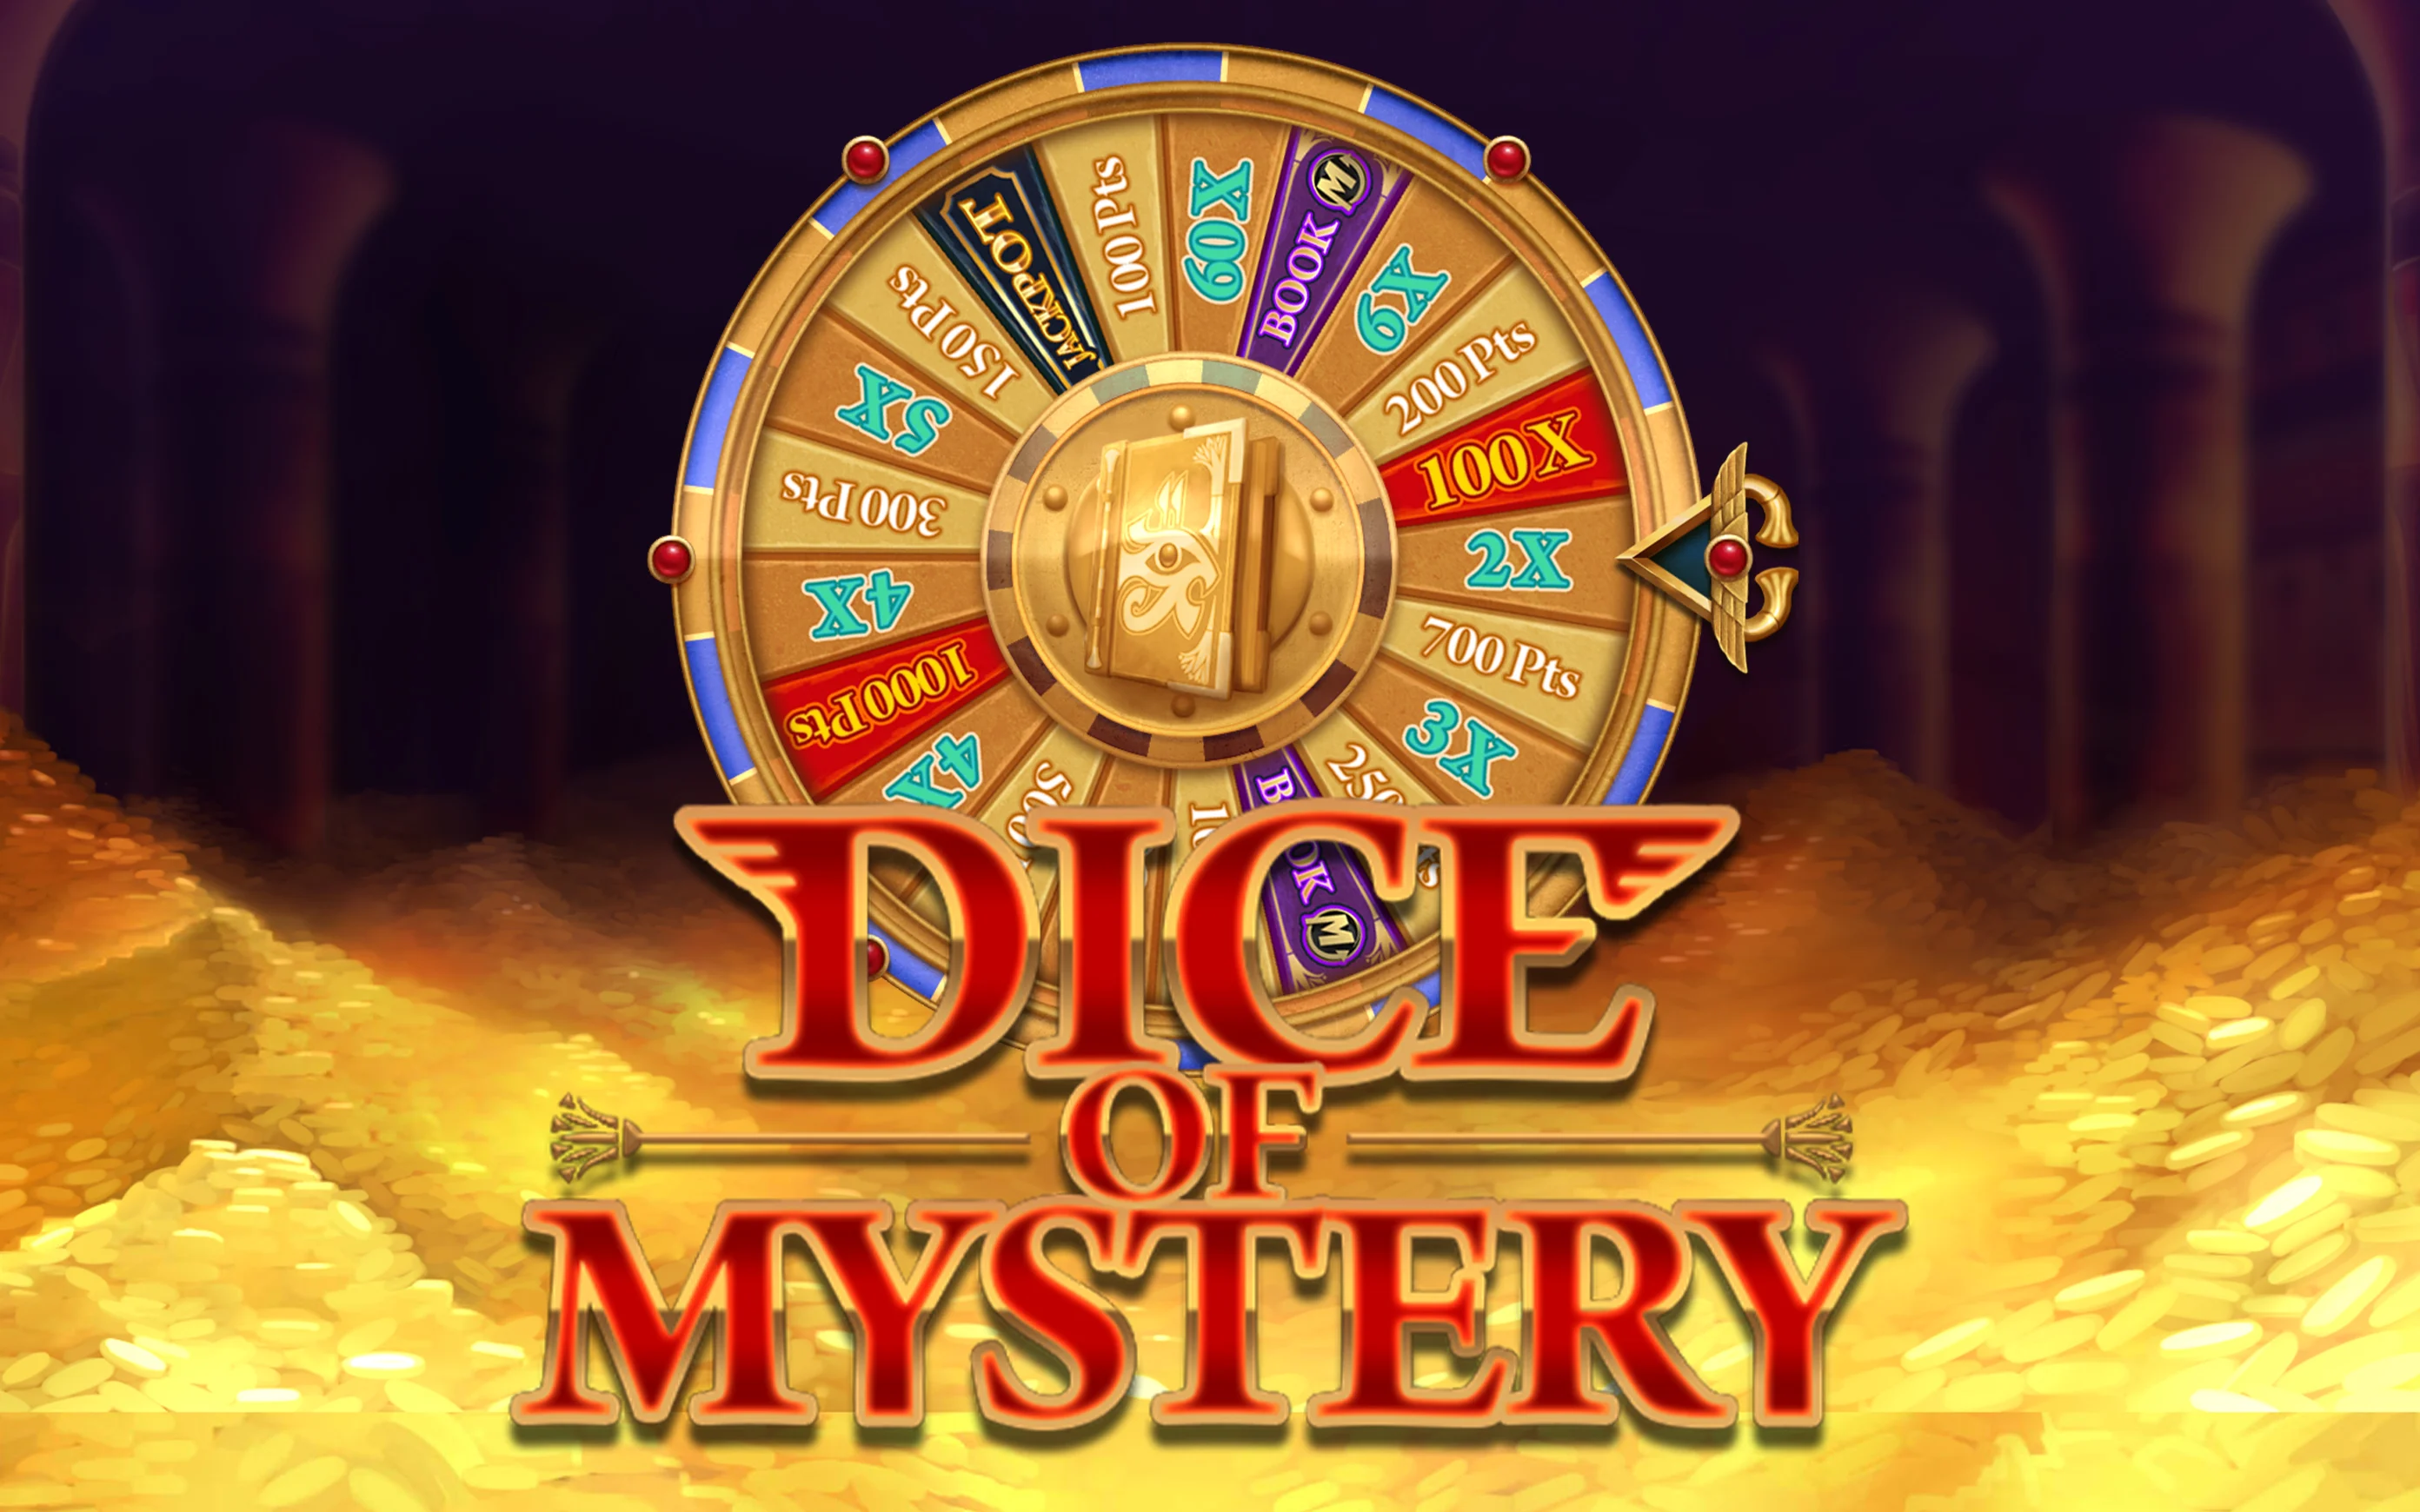 Play Dice Of Mystery on Starcasino.be online casino